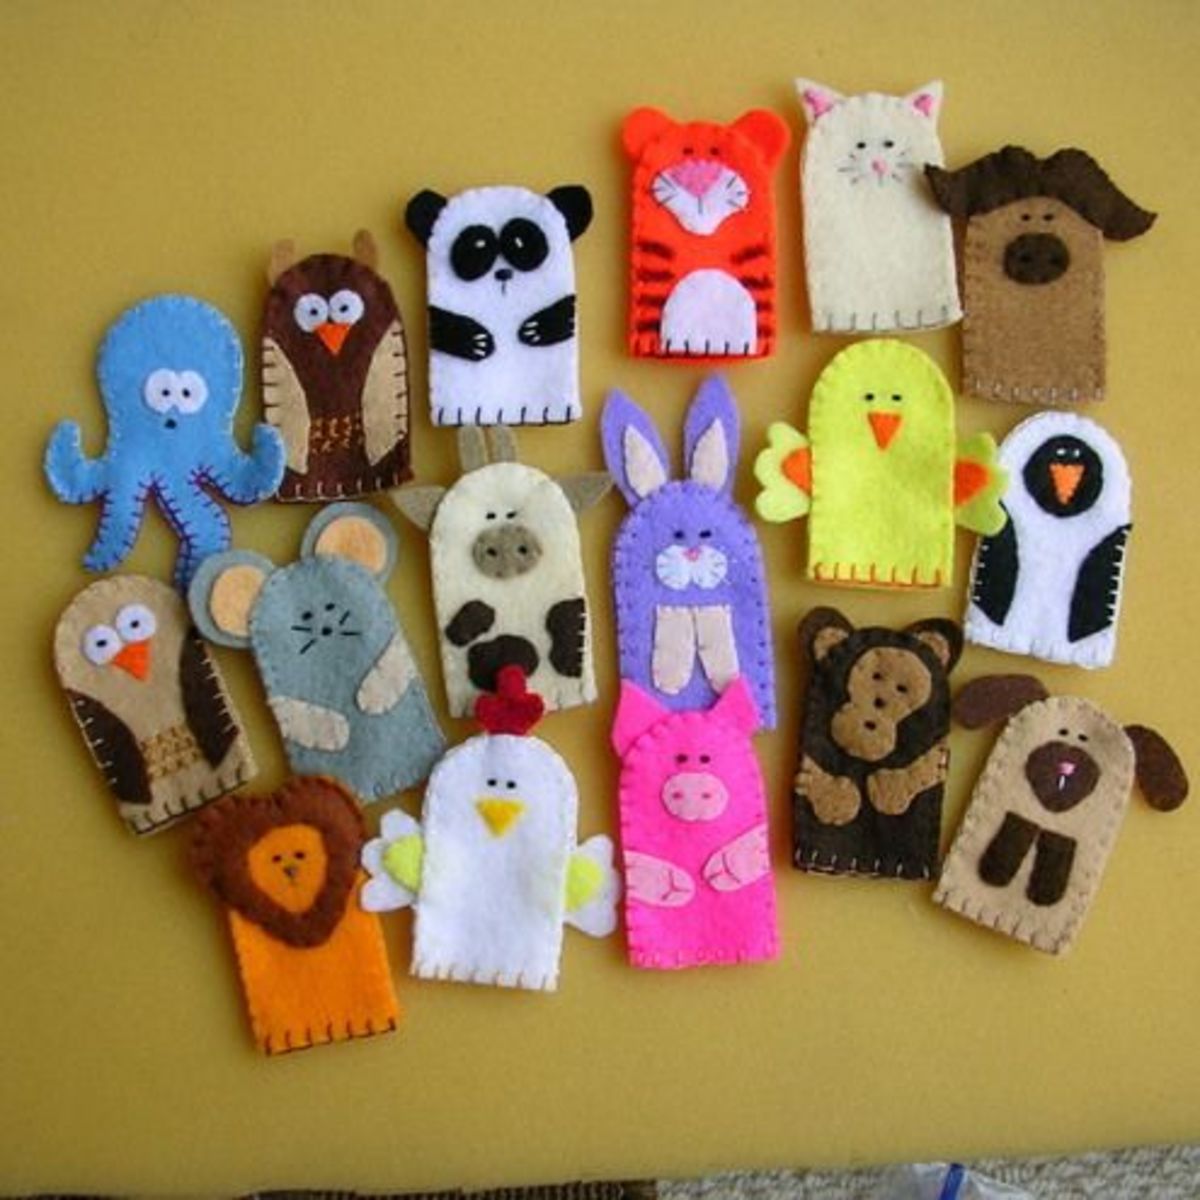 looking-for-socking-stuffers-start-with-soft-plush-animal-finger-puppets